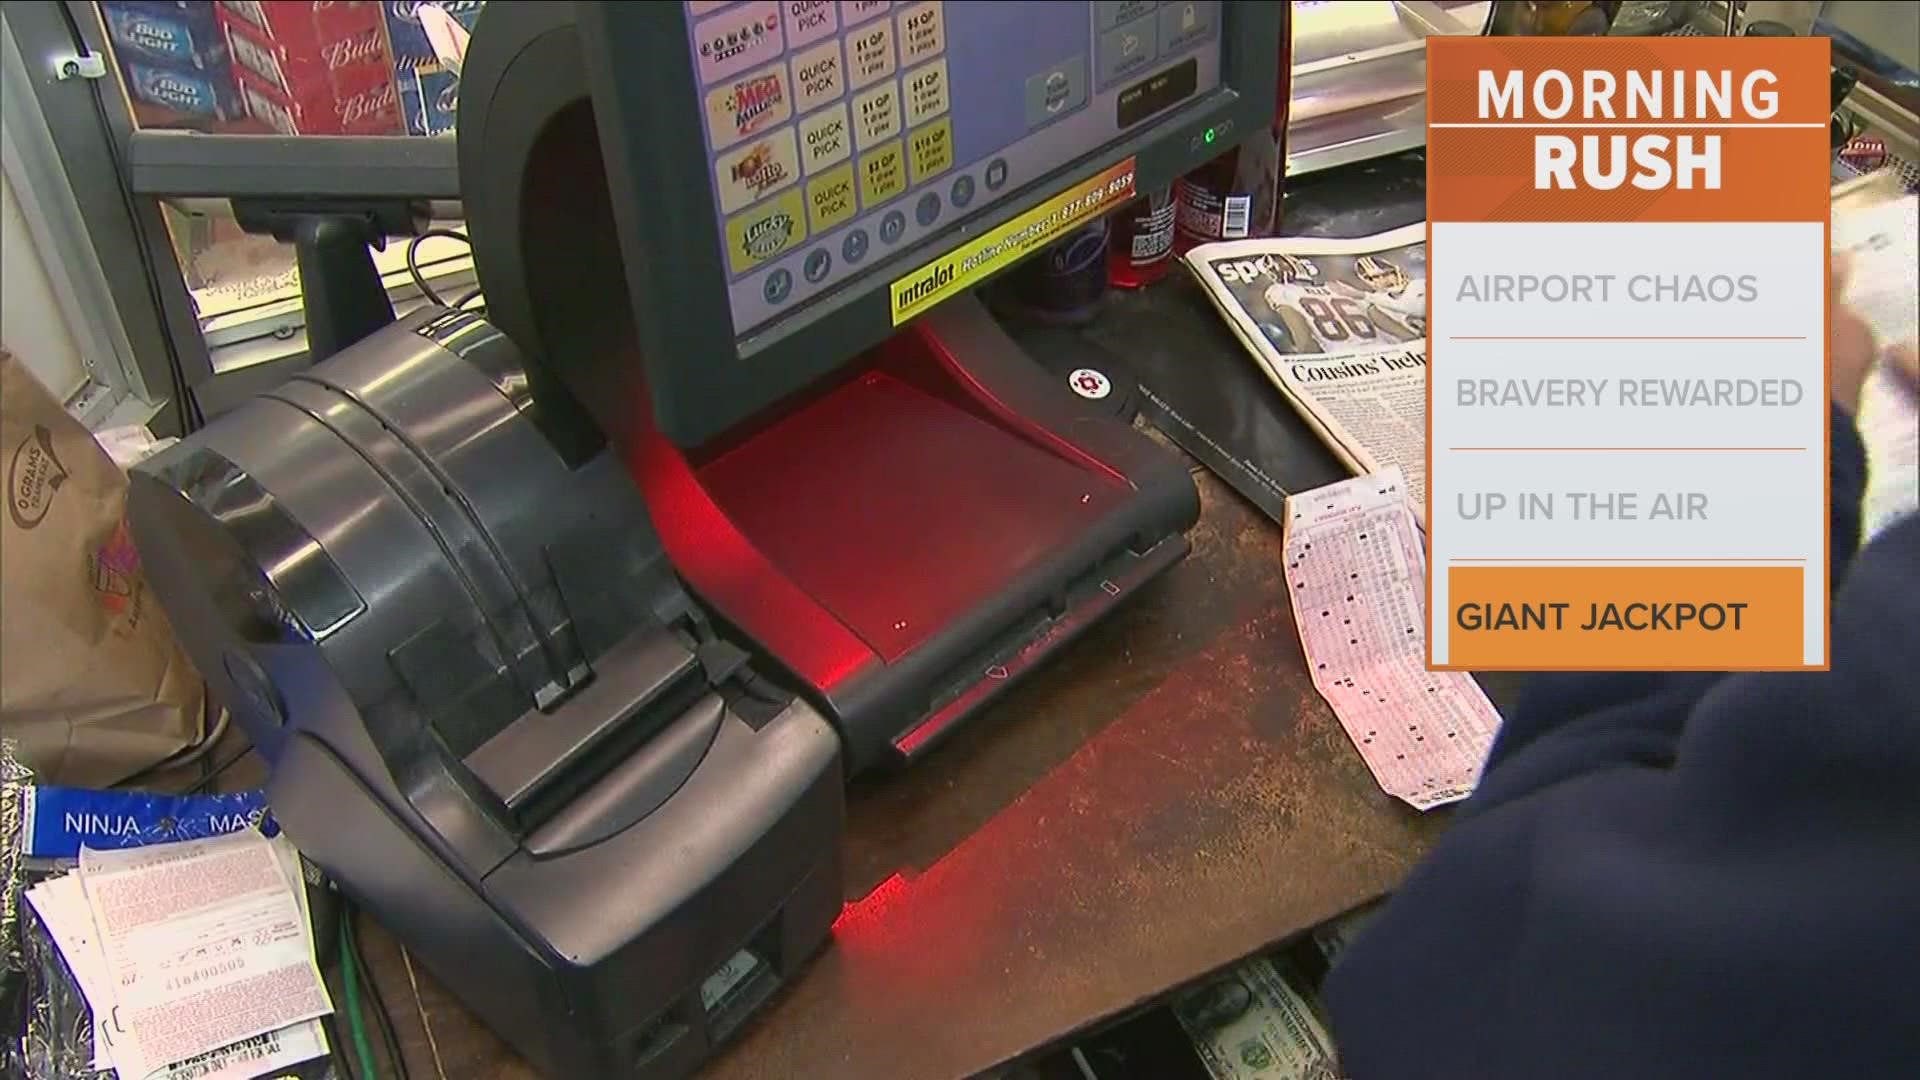 At an estimated $800 million, the jackpot for Saturday's drawing lands in the top five lottery jackpots in U.S. history.